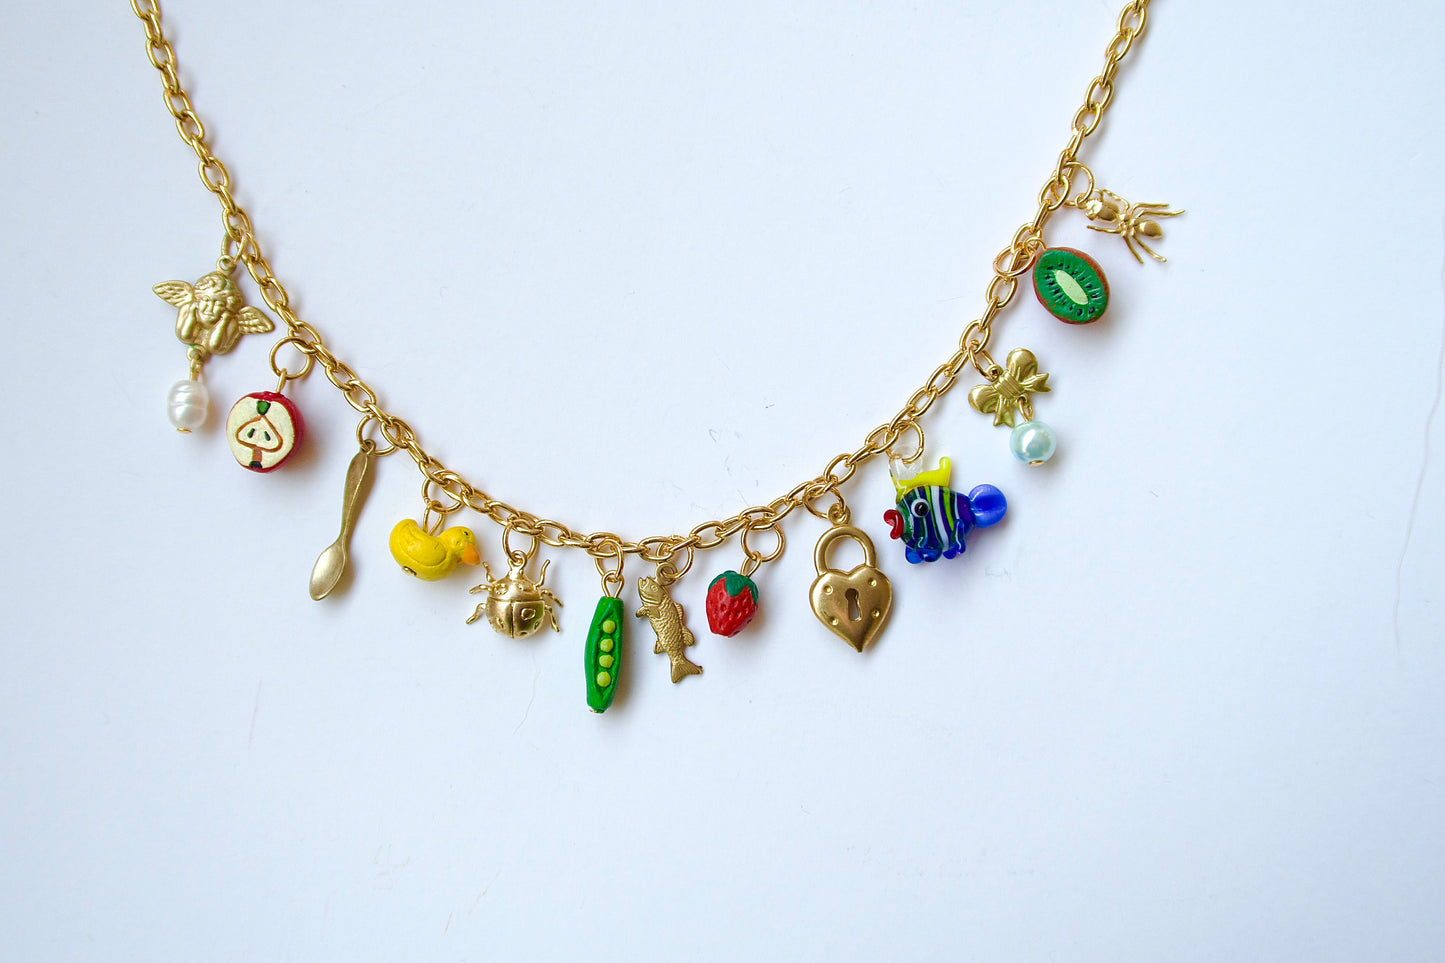 Gold Picnic Necklace